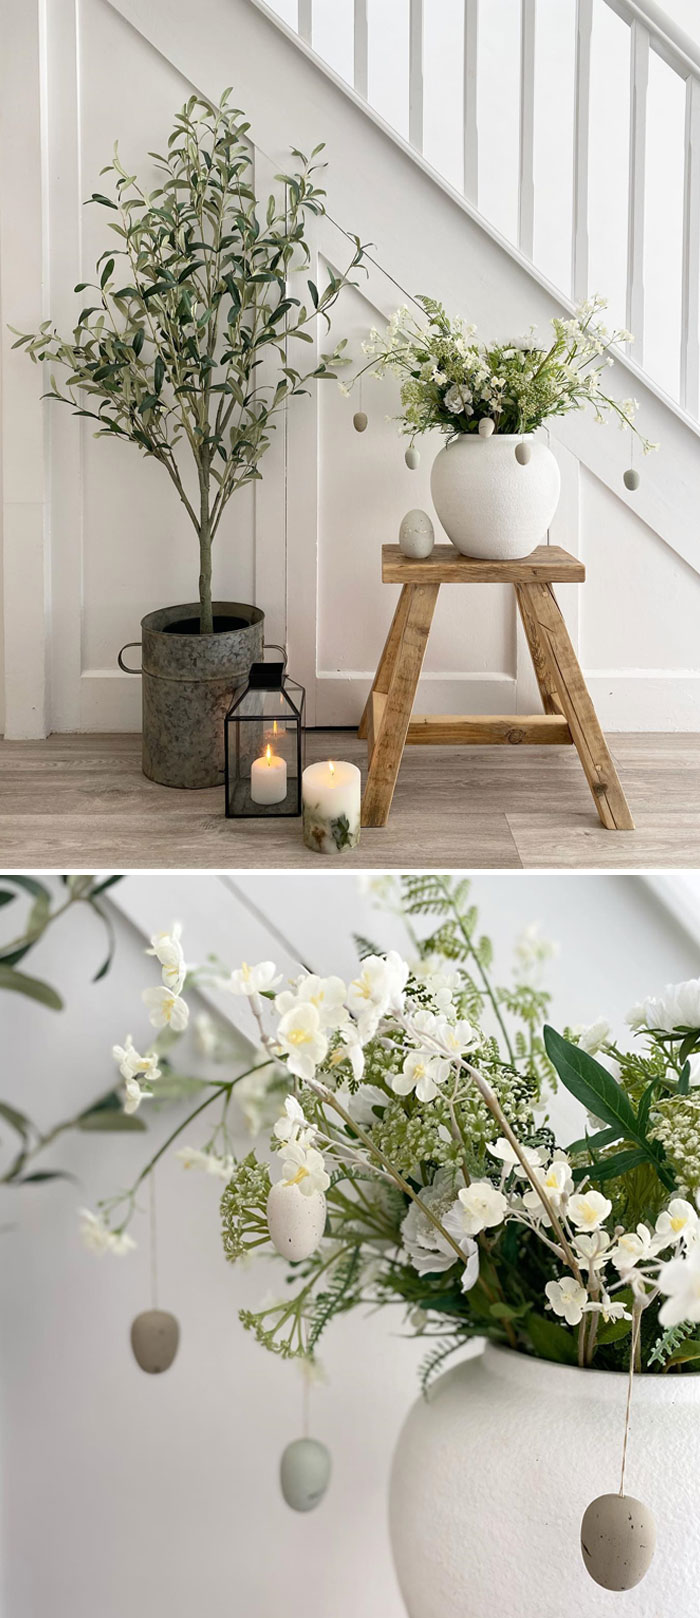 I Thought I’d Share How I Styled My Entryway For Easter In A Simple Yet Beautiful Way